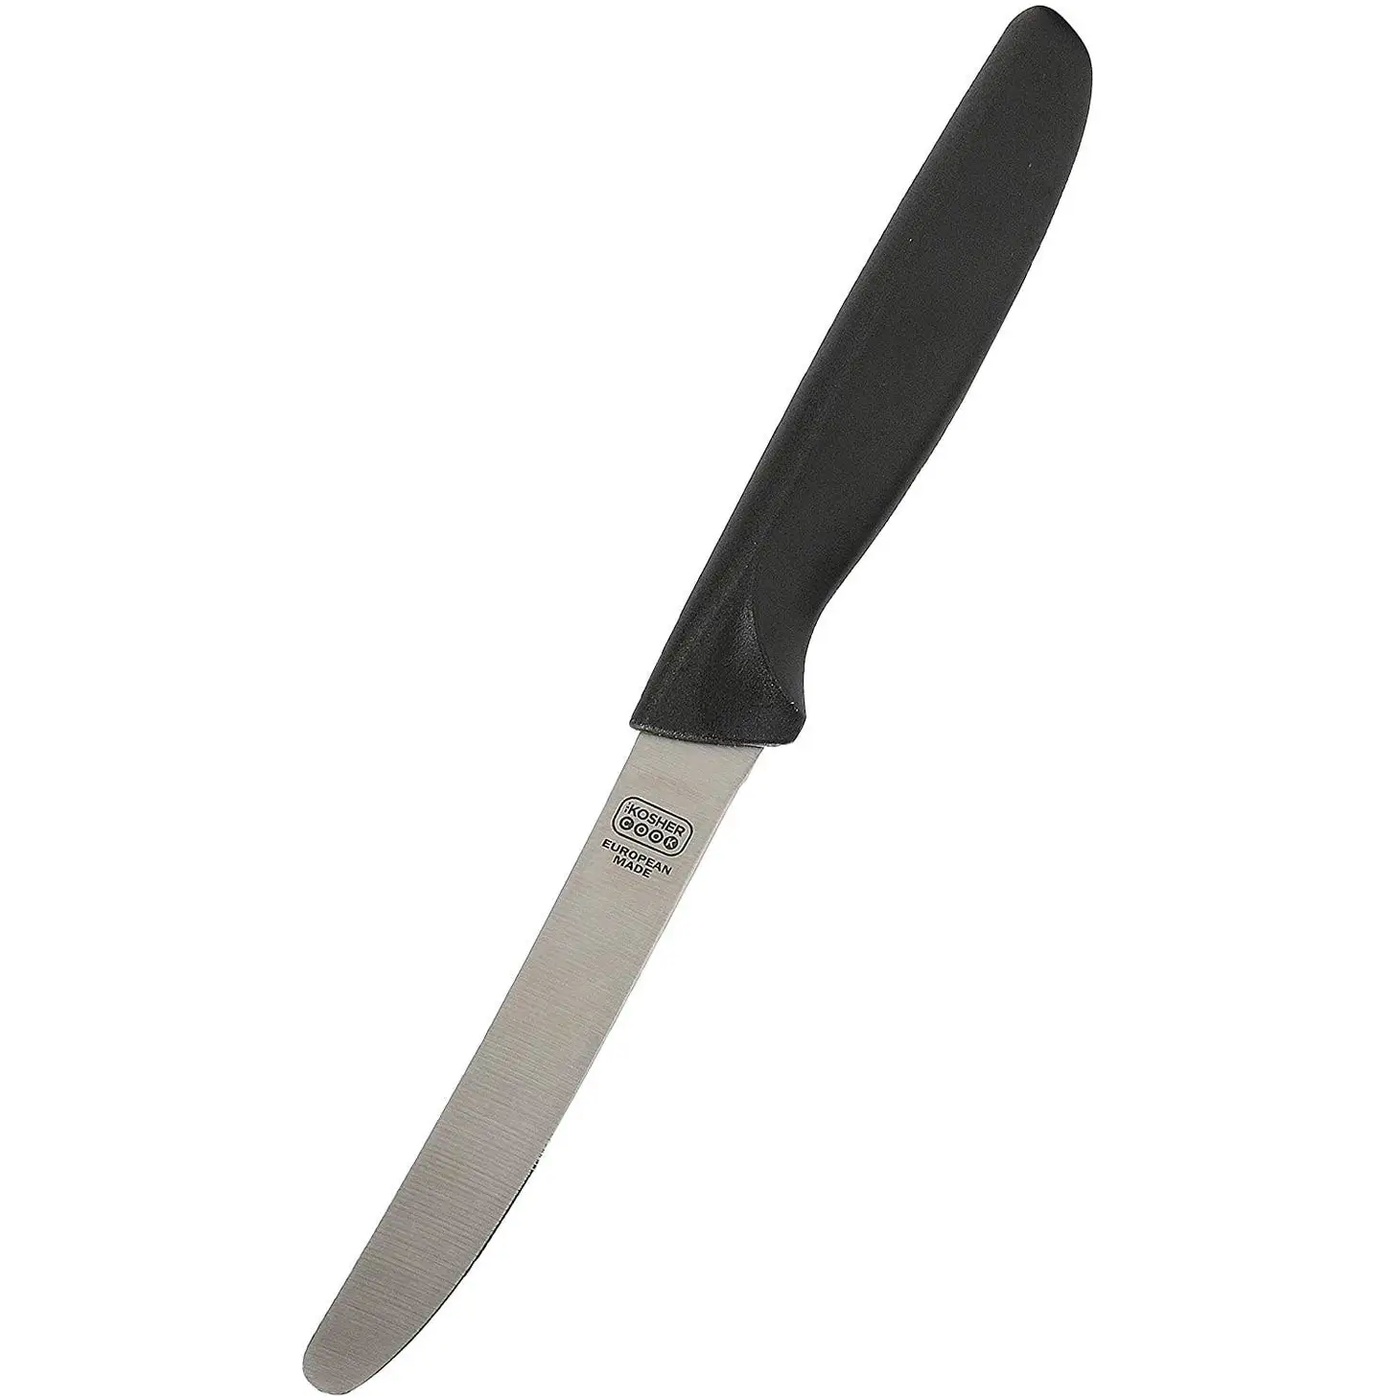 4.5 Inch Kitchen Knife - Black - Set With Style